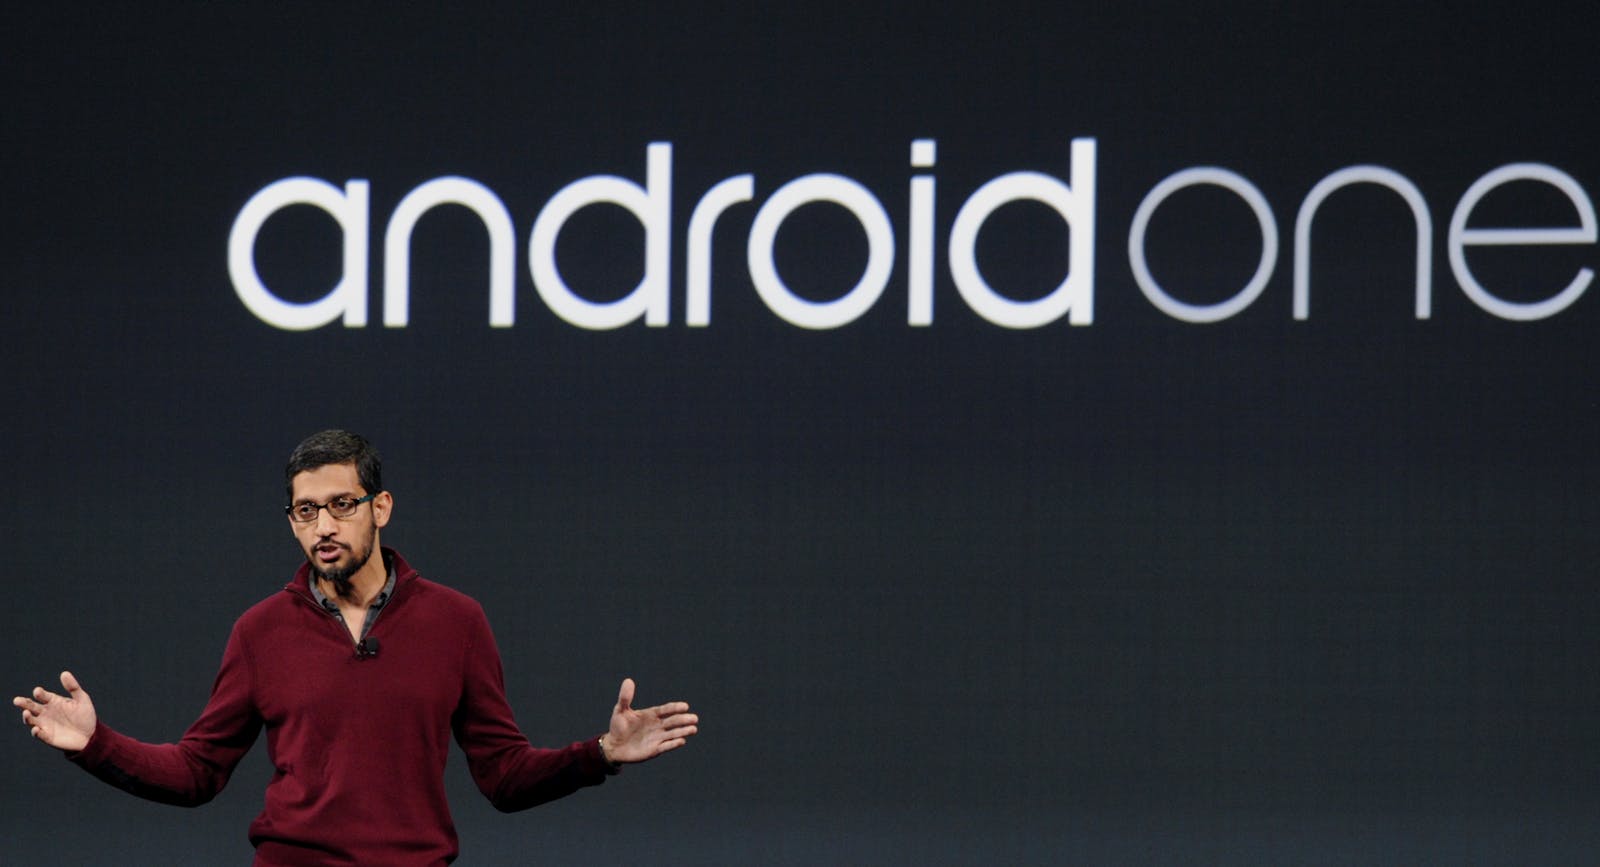 Google's Android chief, Sundar Pichai, introduces Android One in June. Photo by Bloomberg.